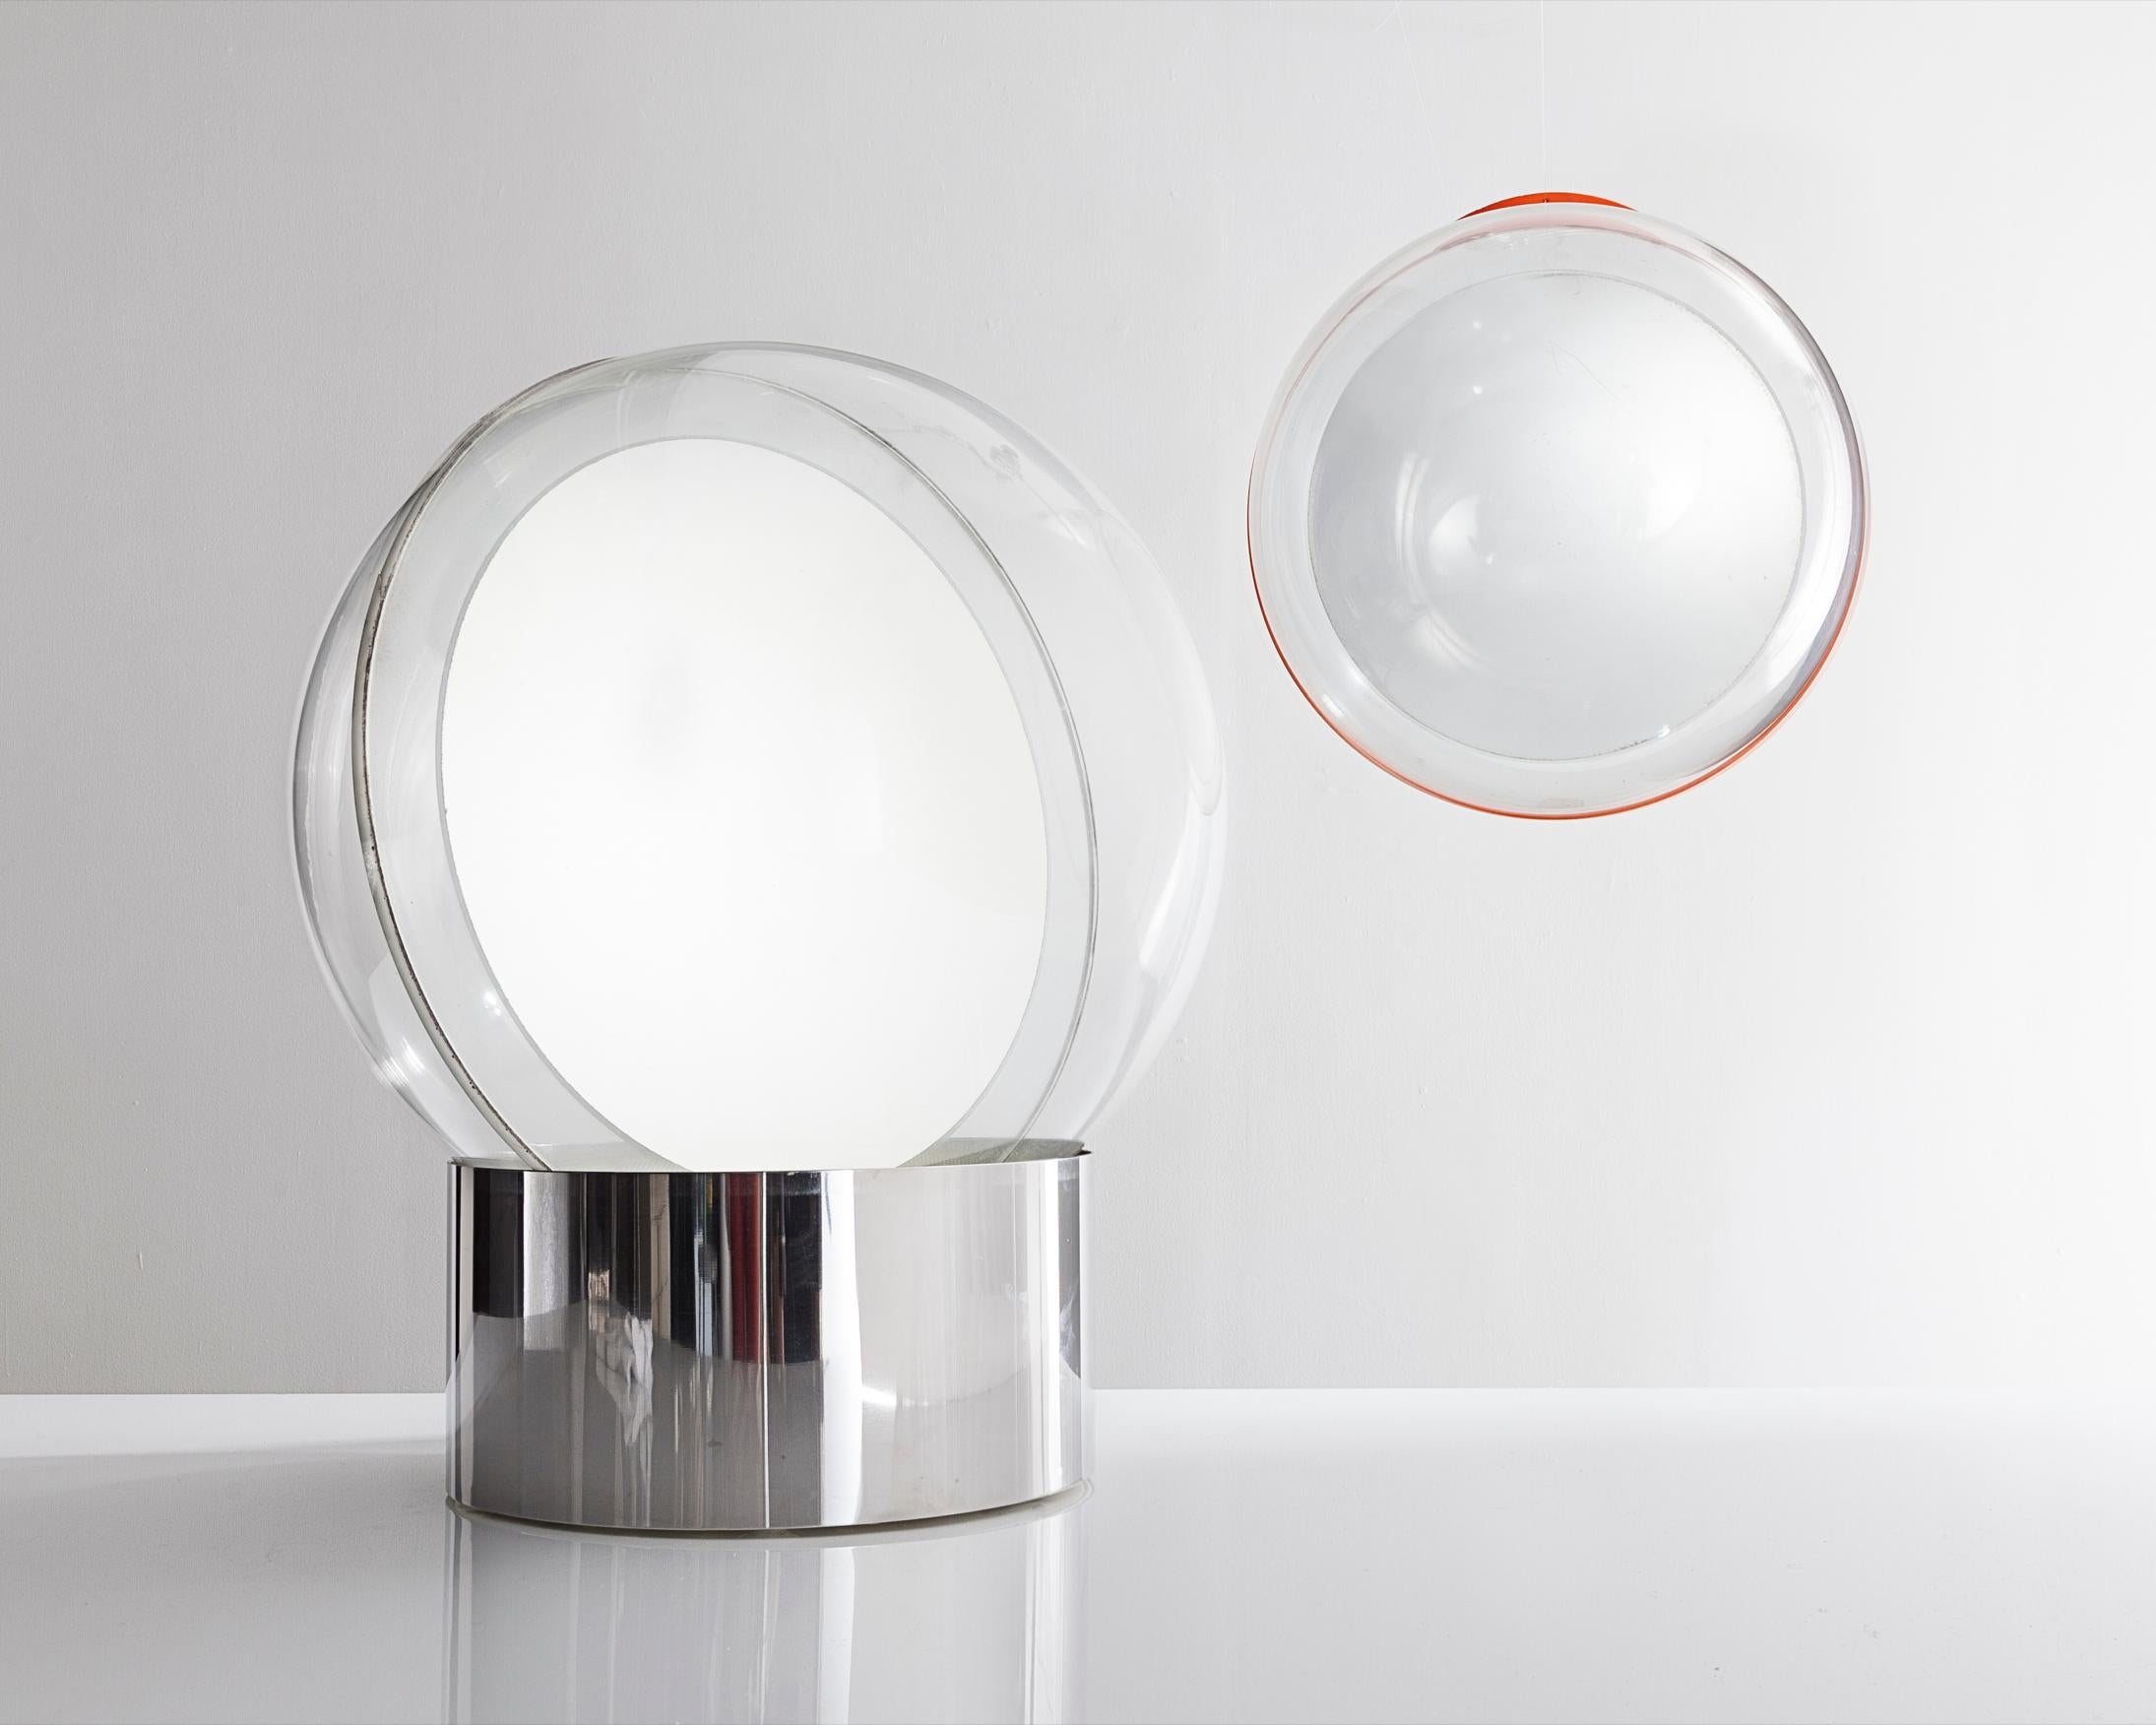 Italian Lamp 4043 in Chrome, Perspex, and Mirrored Glass by Filippo Panseca, 1968 For Sale